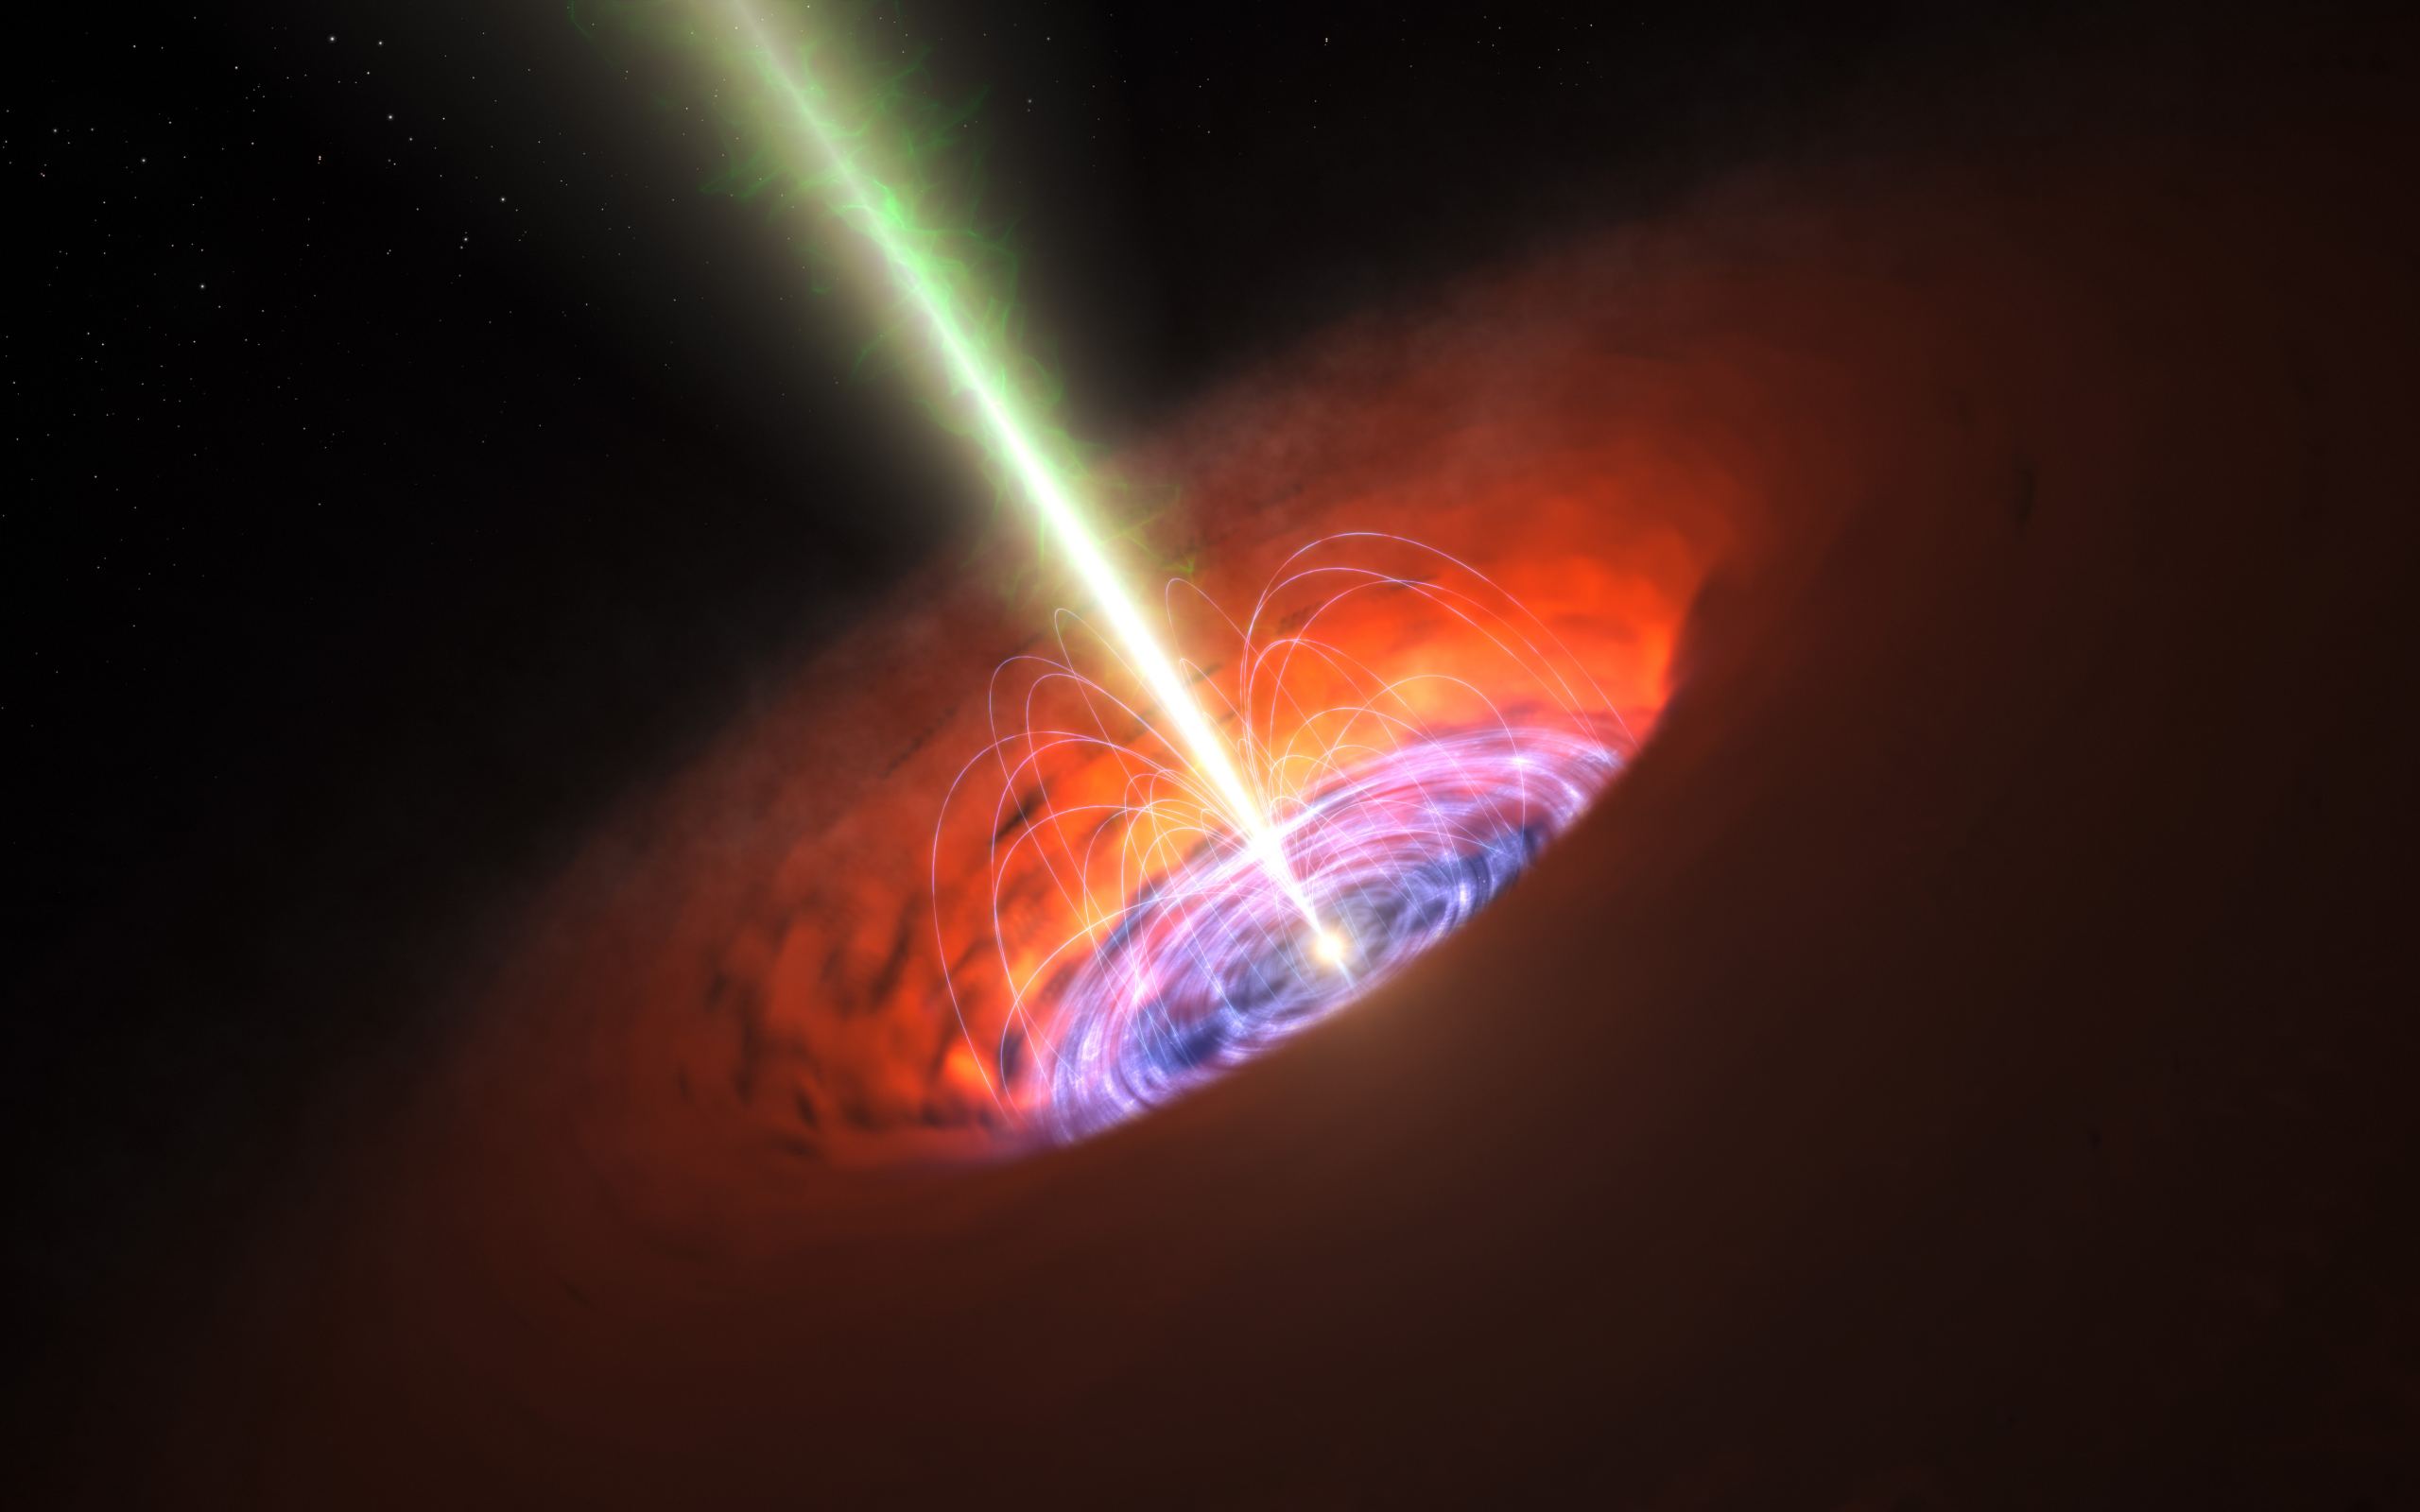 A black hole fires a stream of matter at its neighboring galaxy